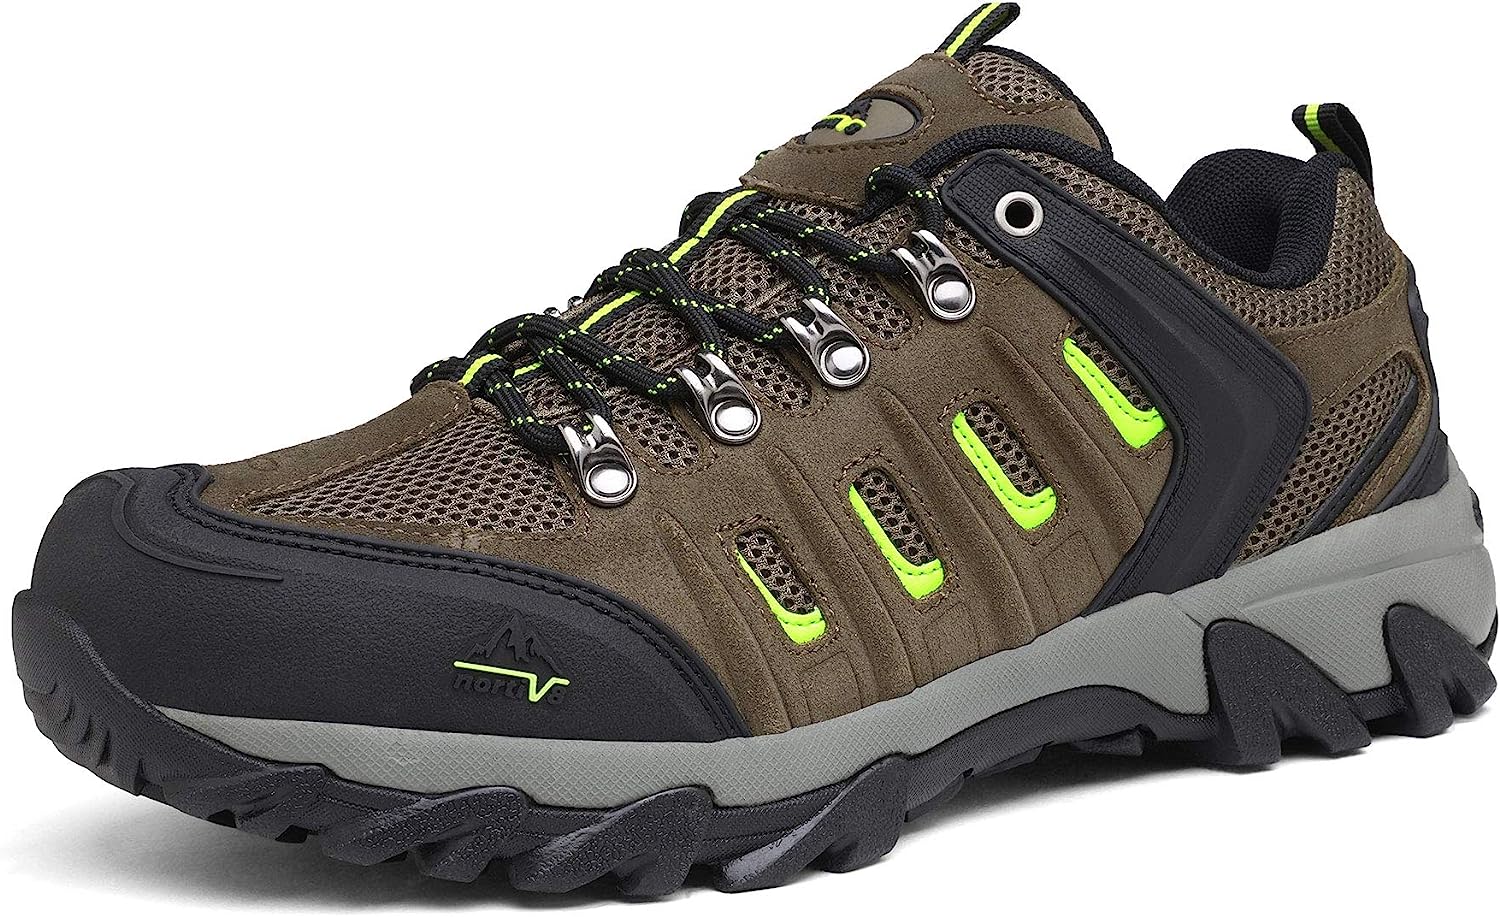 NORTIV 8 Men's Waterproof Hiking Shoes Leather Low-Top [...]